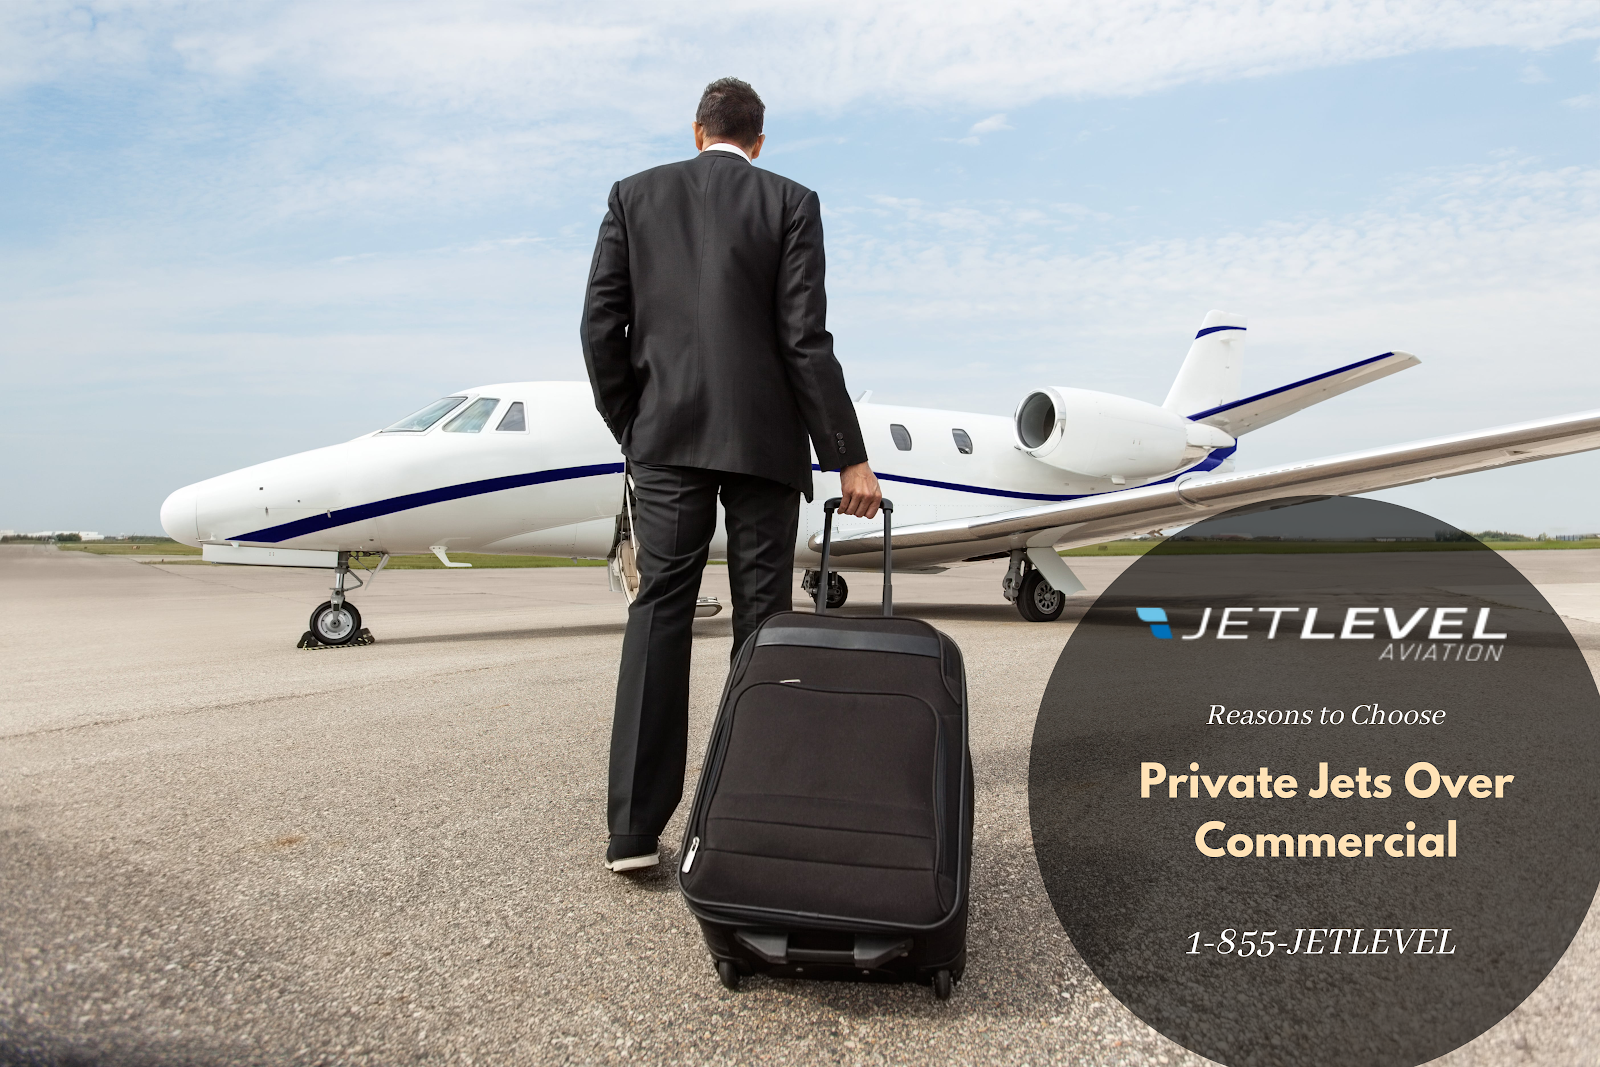 Reasons to choose Private Jets over Commercial